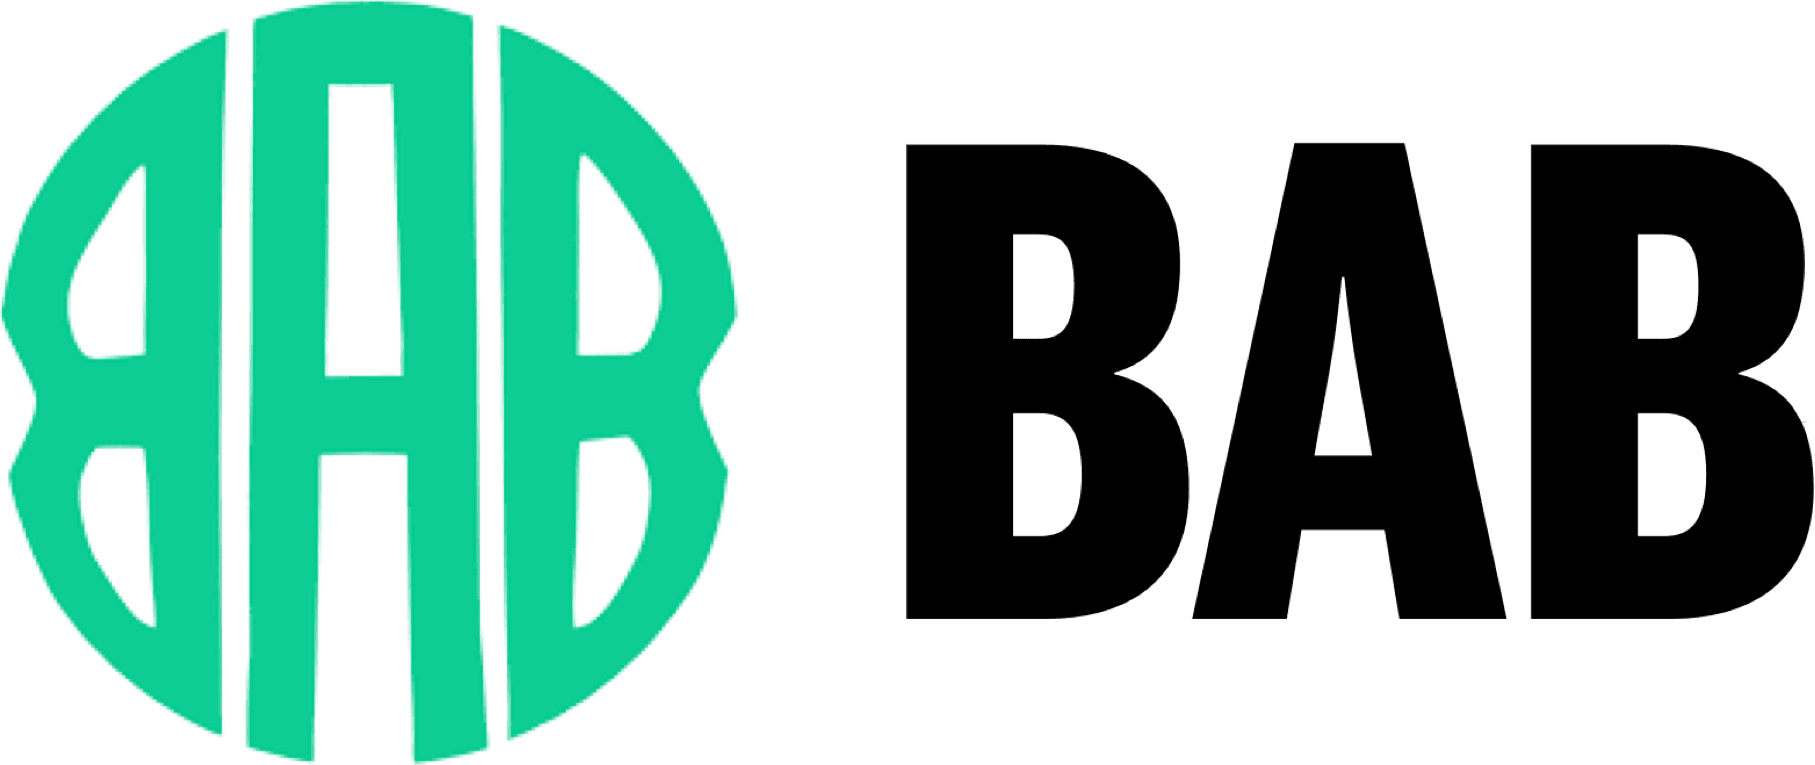 Be A Banker(BAB)